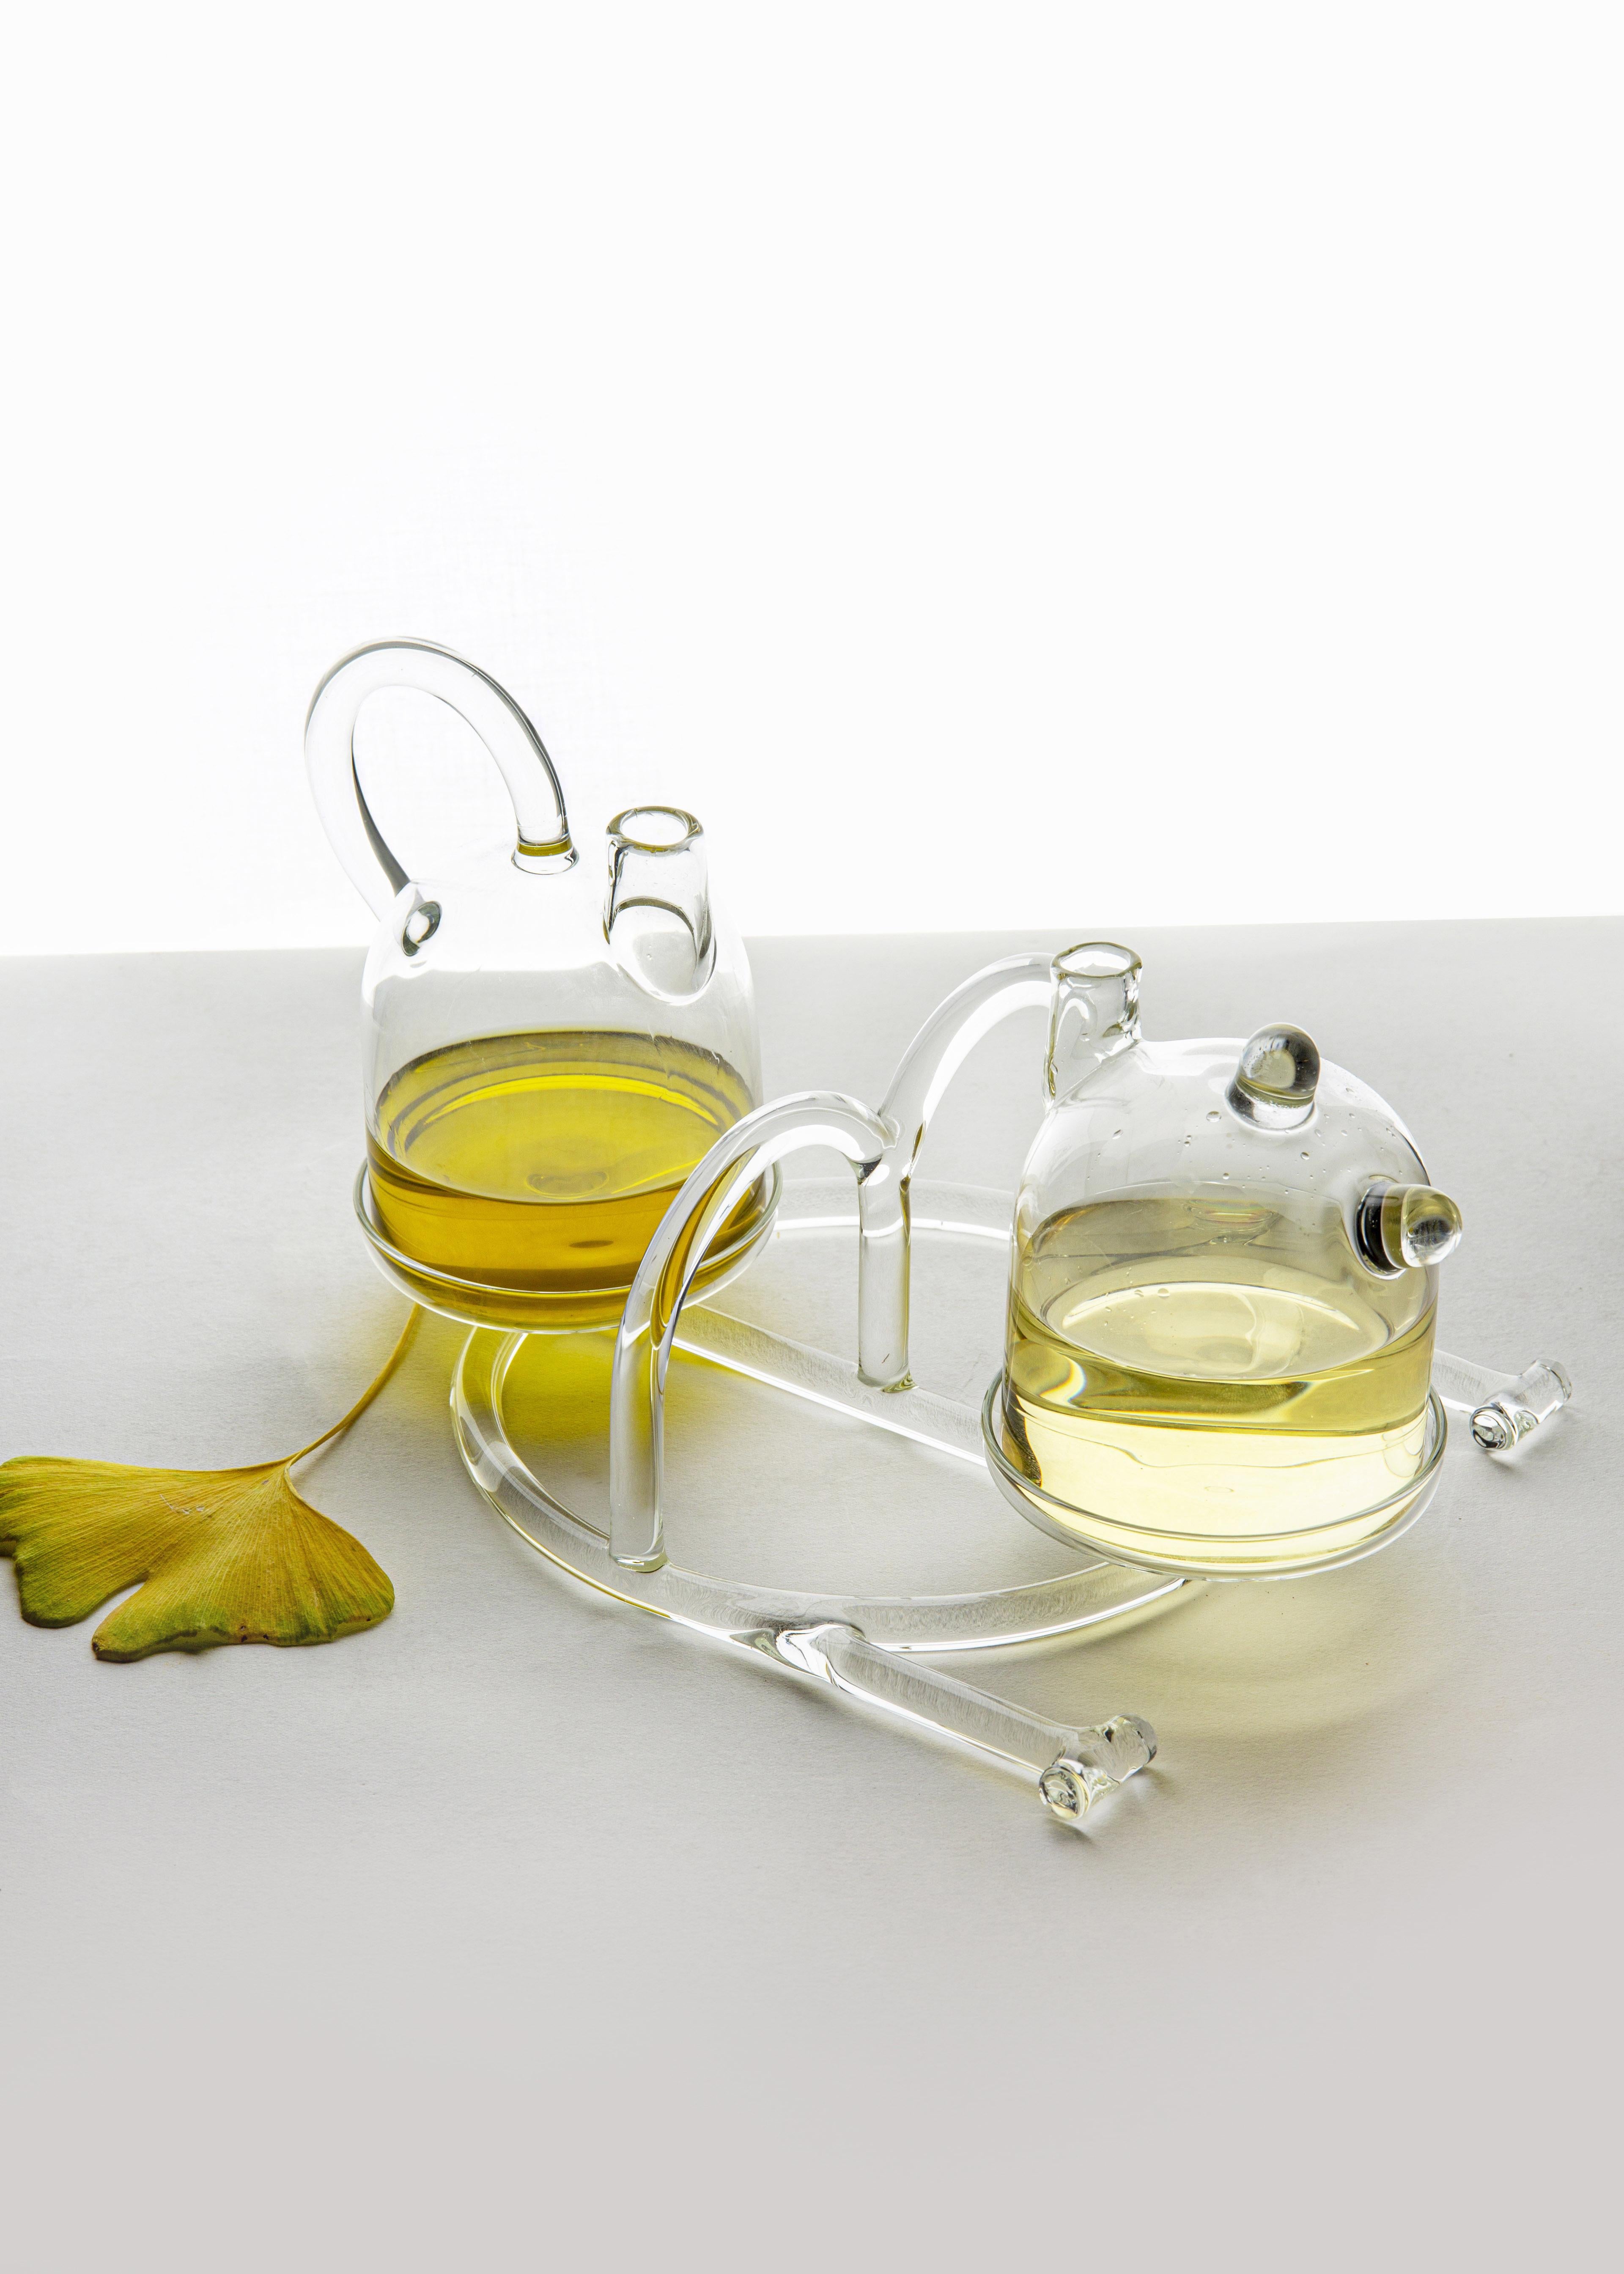 Oil & vinegar from SiO2 Tableware collection 

Two small cruets suitable for holding condiments such as Oil and Vinegar. The base with
its large handle allows you too easily carry the pair of cruets. 
Part of the SiO2 tableware collection, it